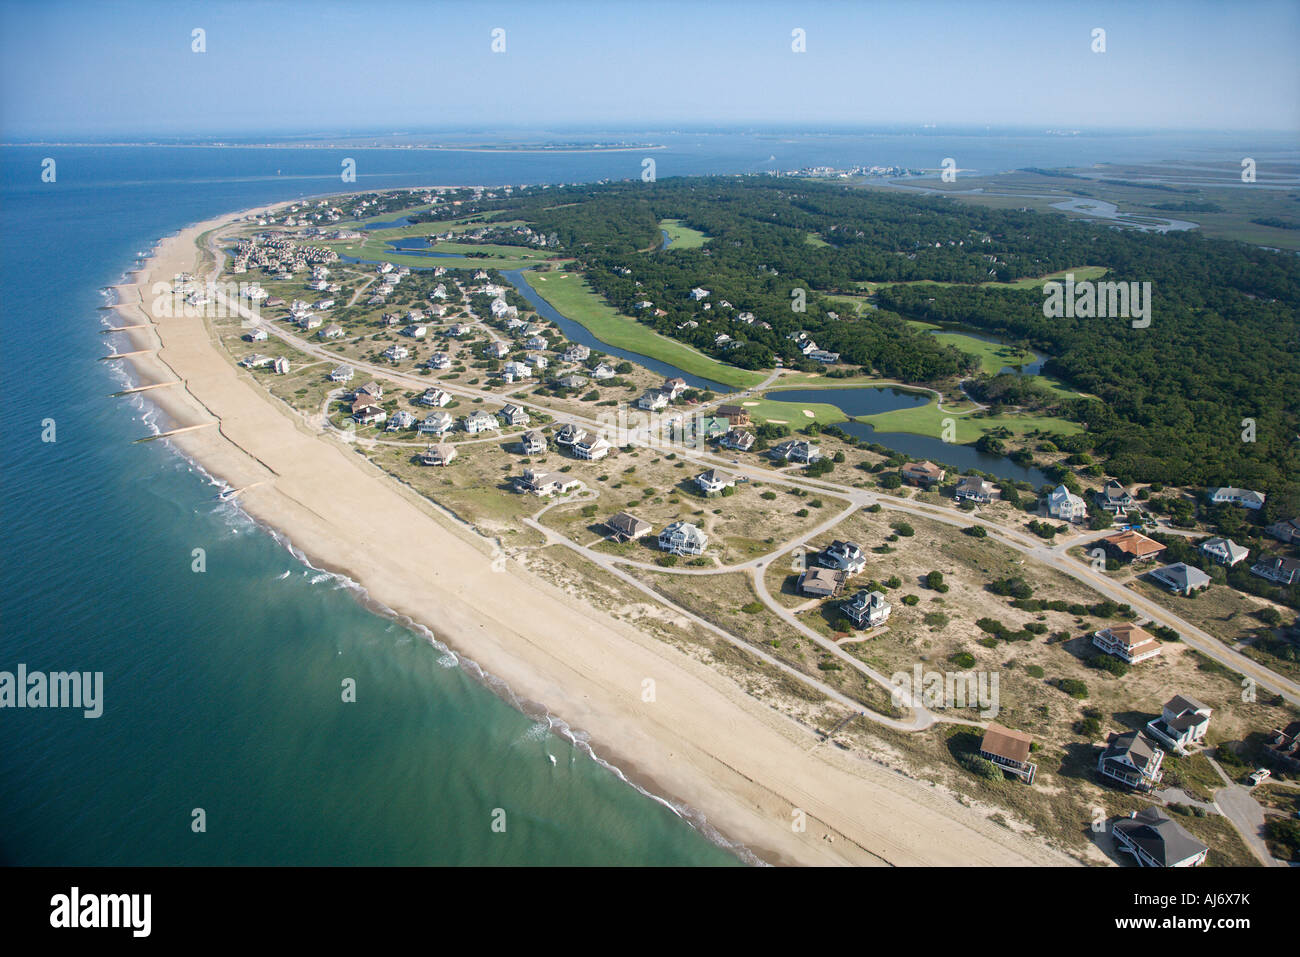 Aerial view of beach and residential neighborhood at Bald Head Island ...